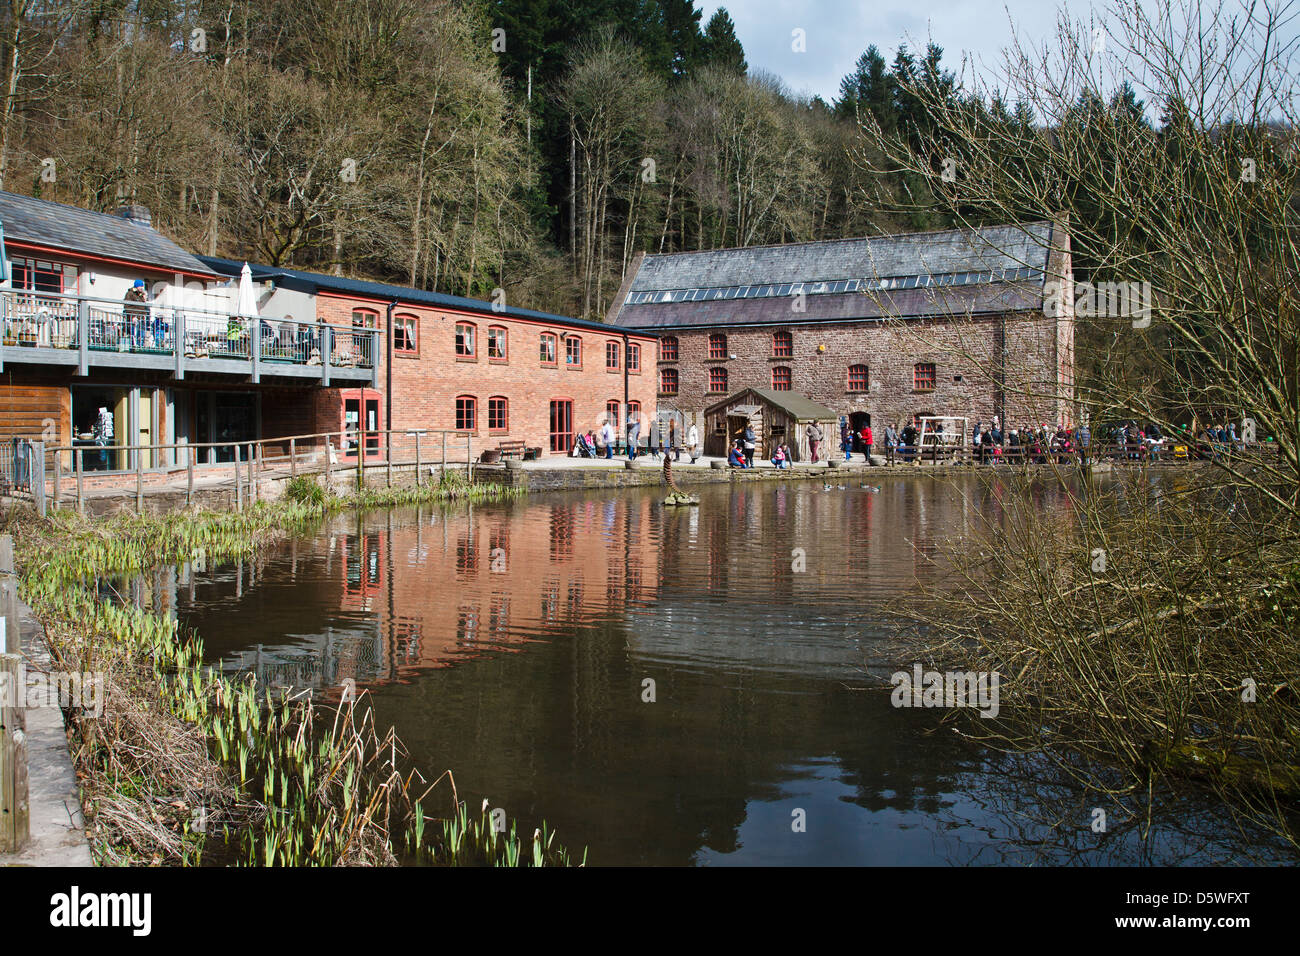 Dean Heritage Centre, Camp Mill, Soudley, vicino Cinderford, Foresta di Dean, Gloucestershire Foto Stock